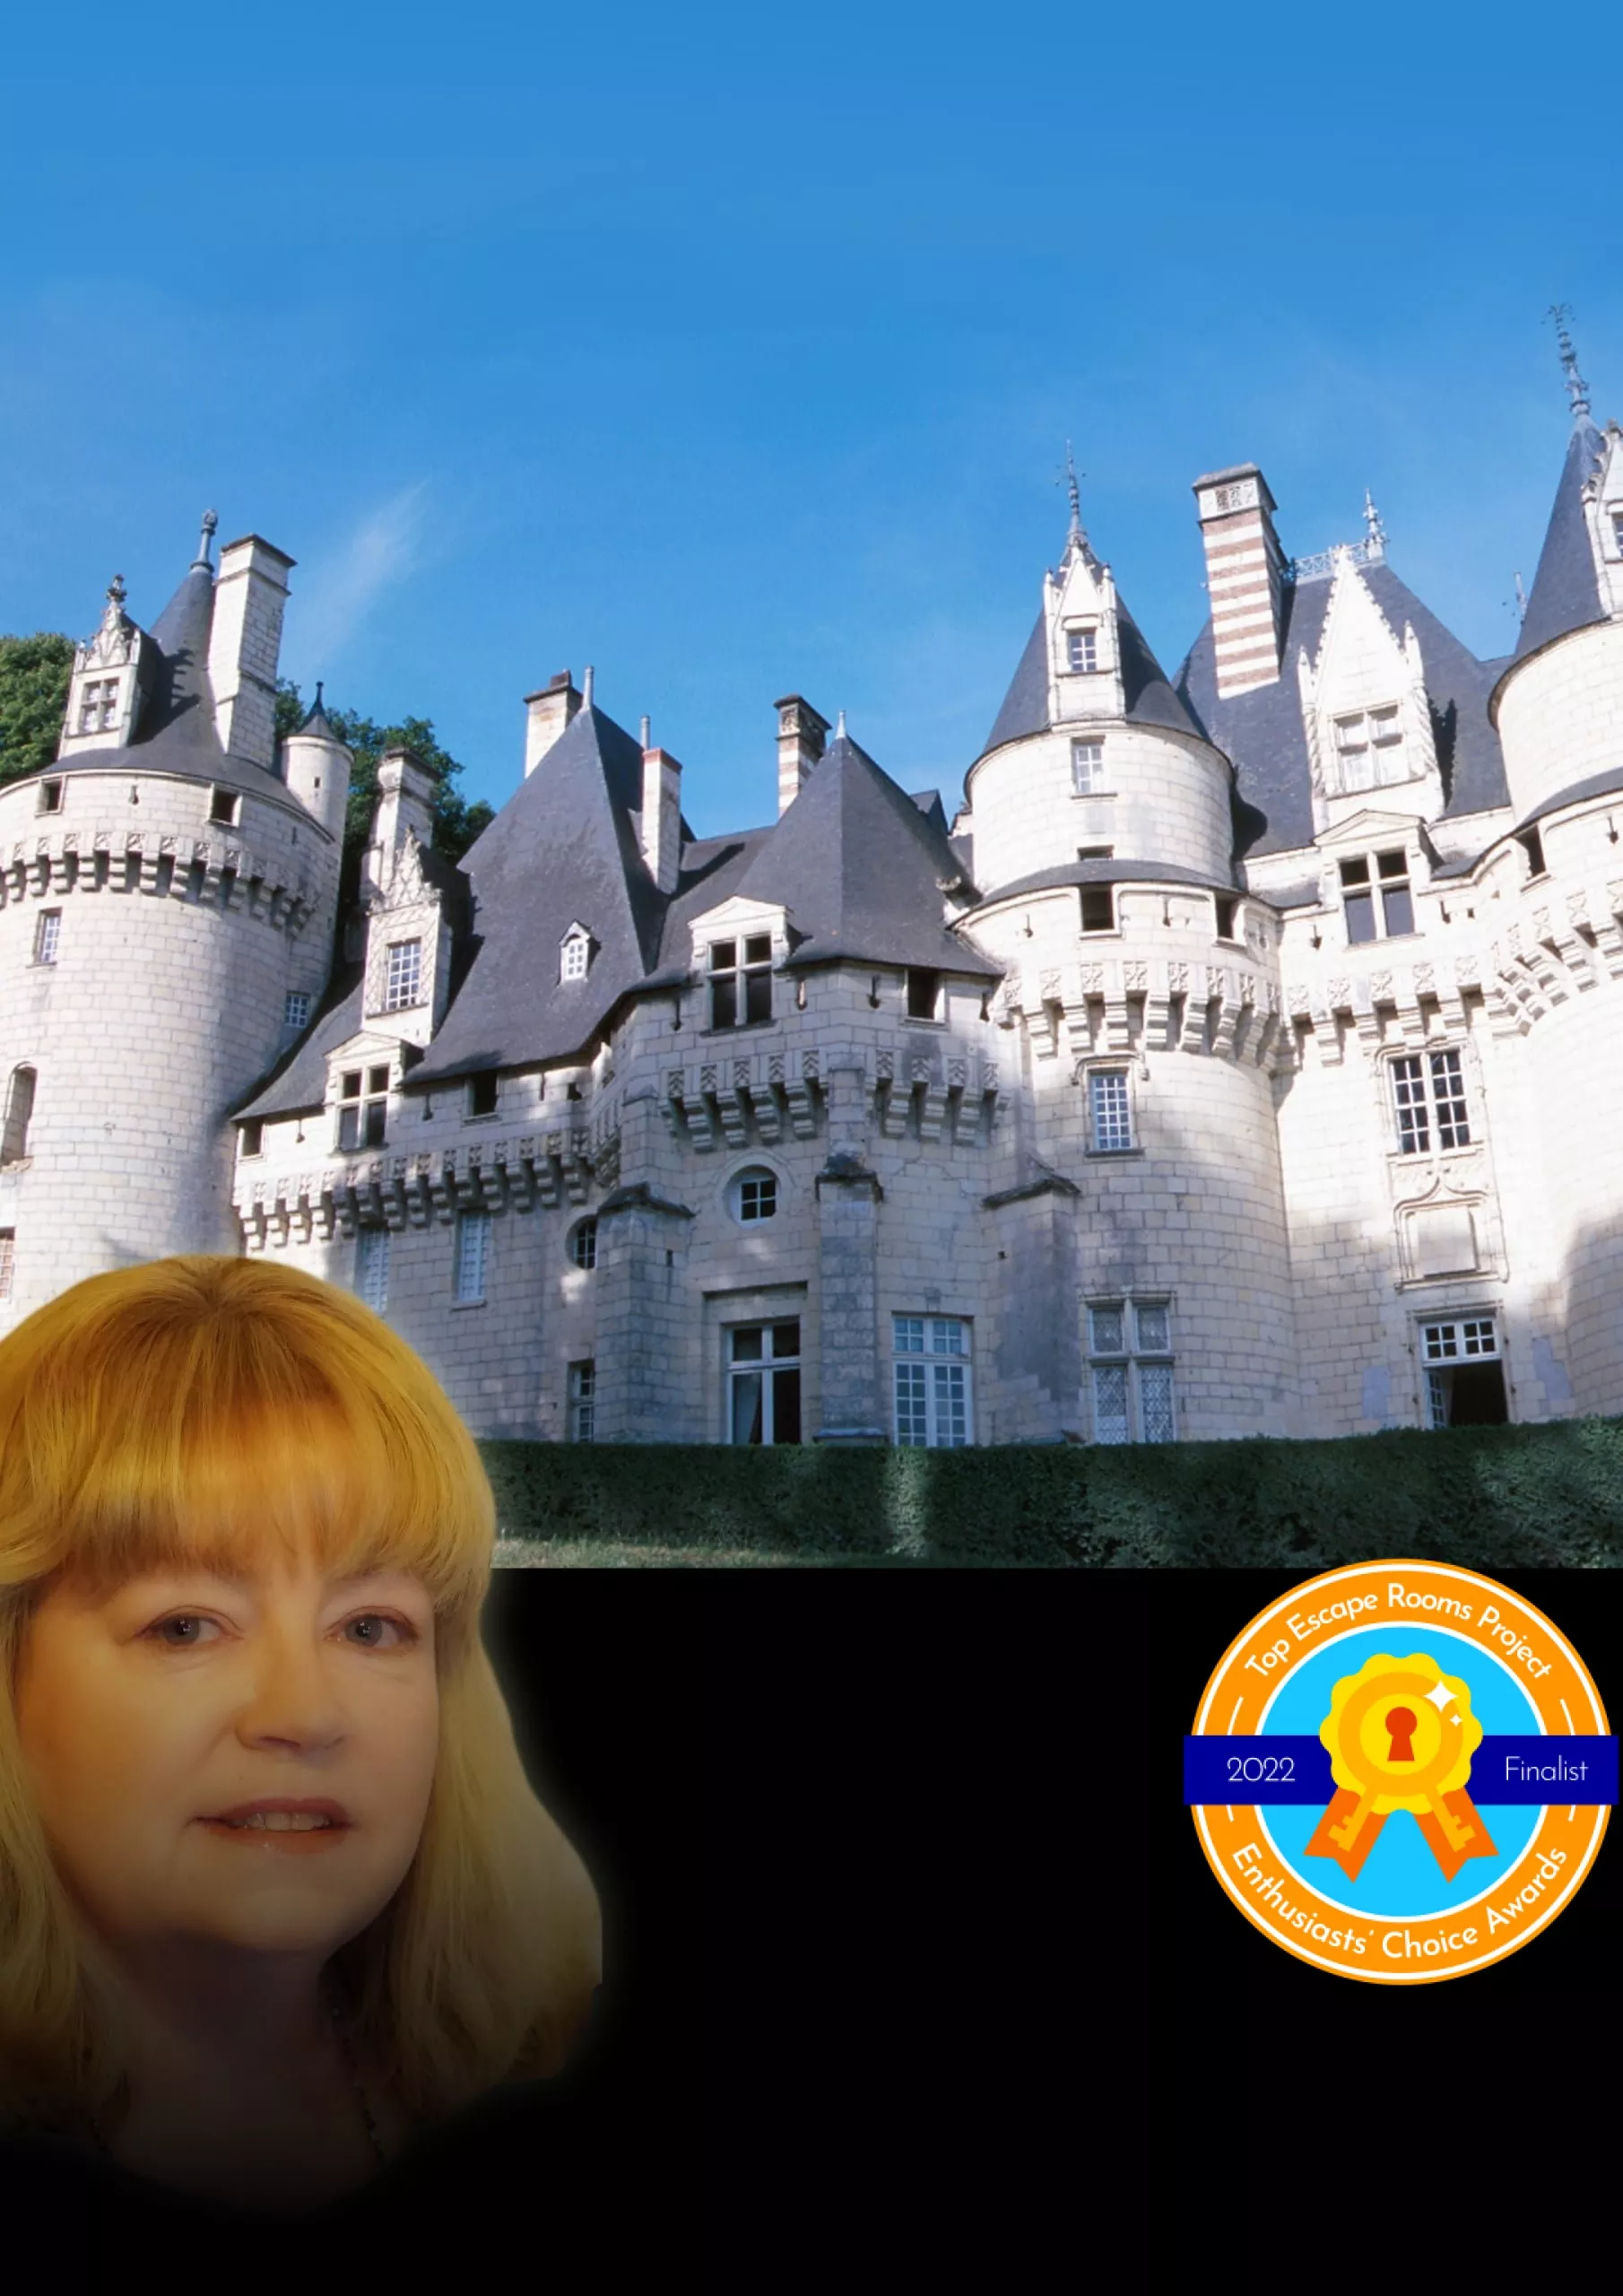 Aunt May from "The Inheritance" in front of her castle. Top Escape Room Project 2022 Finalist.